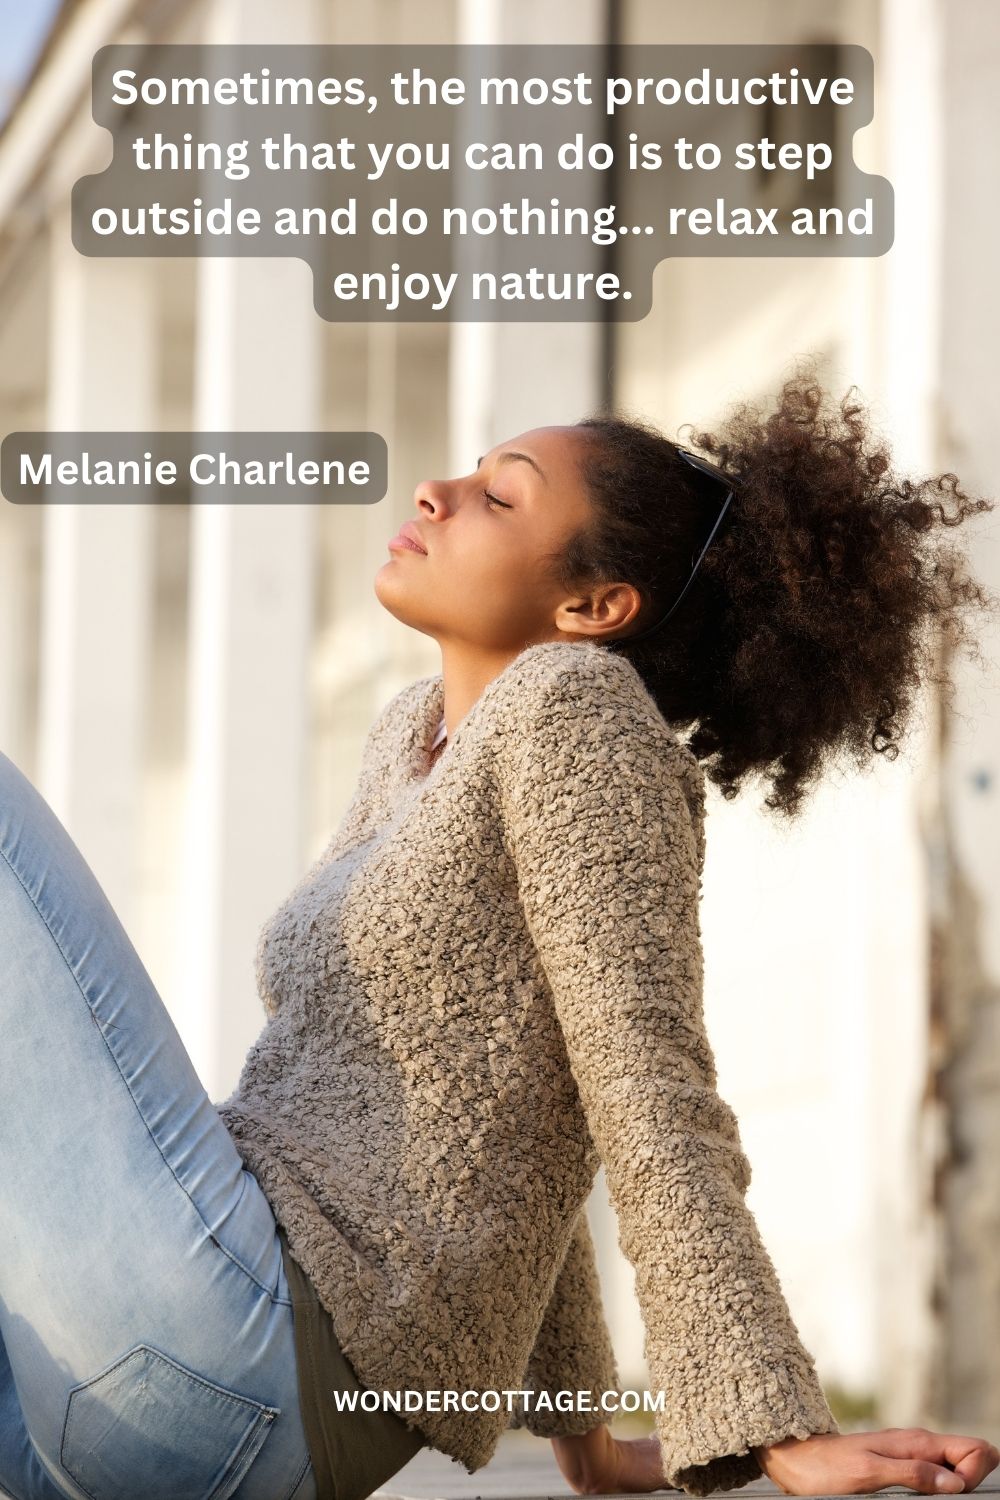 Sometimes, the most productive thing that you can do is to step outside and do nothing... relax and enjoy nature. Melanie Charlene